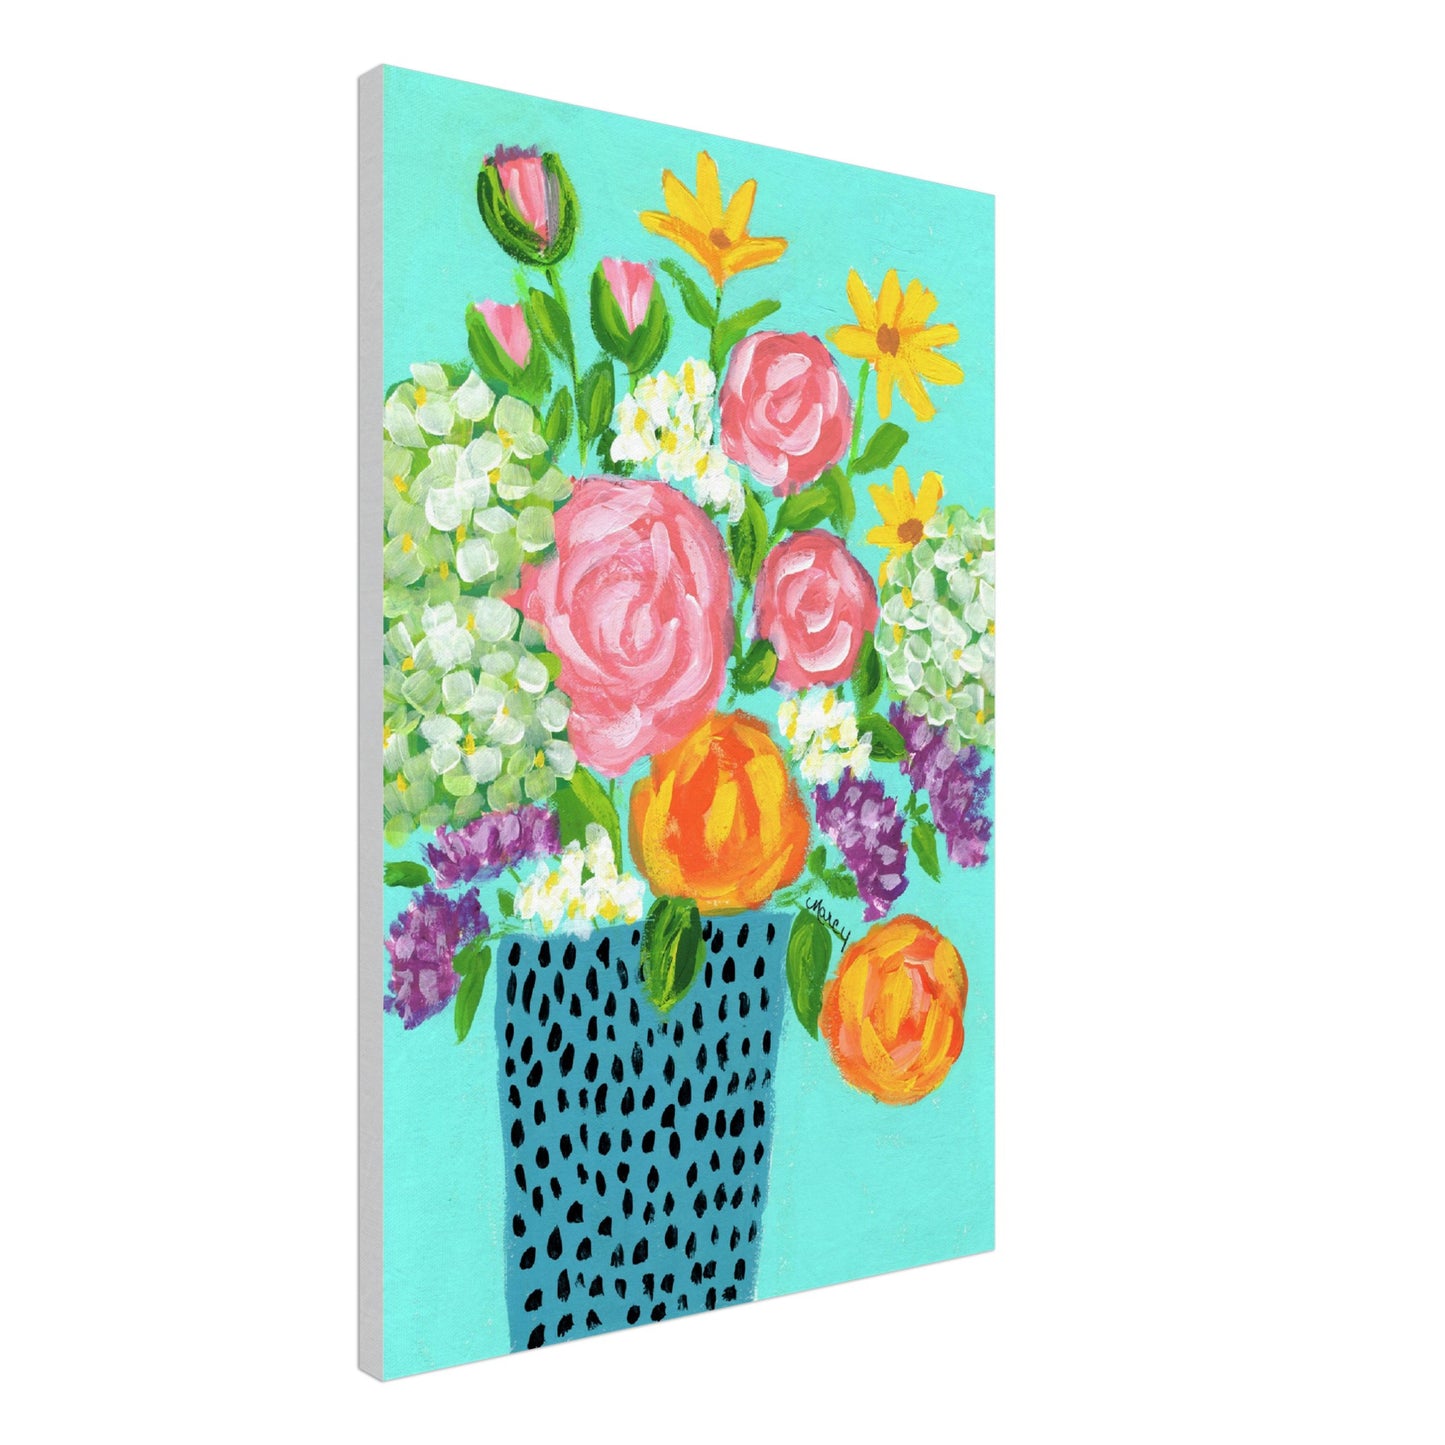 Polka Dots and Flowers on Stretched Canvas